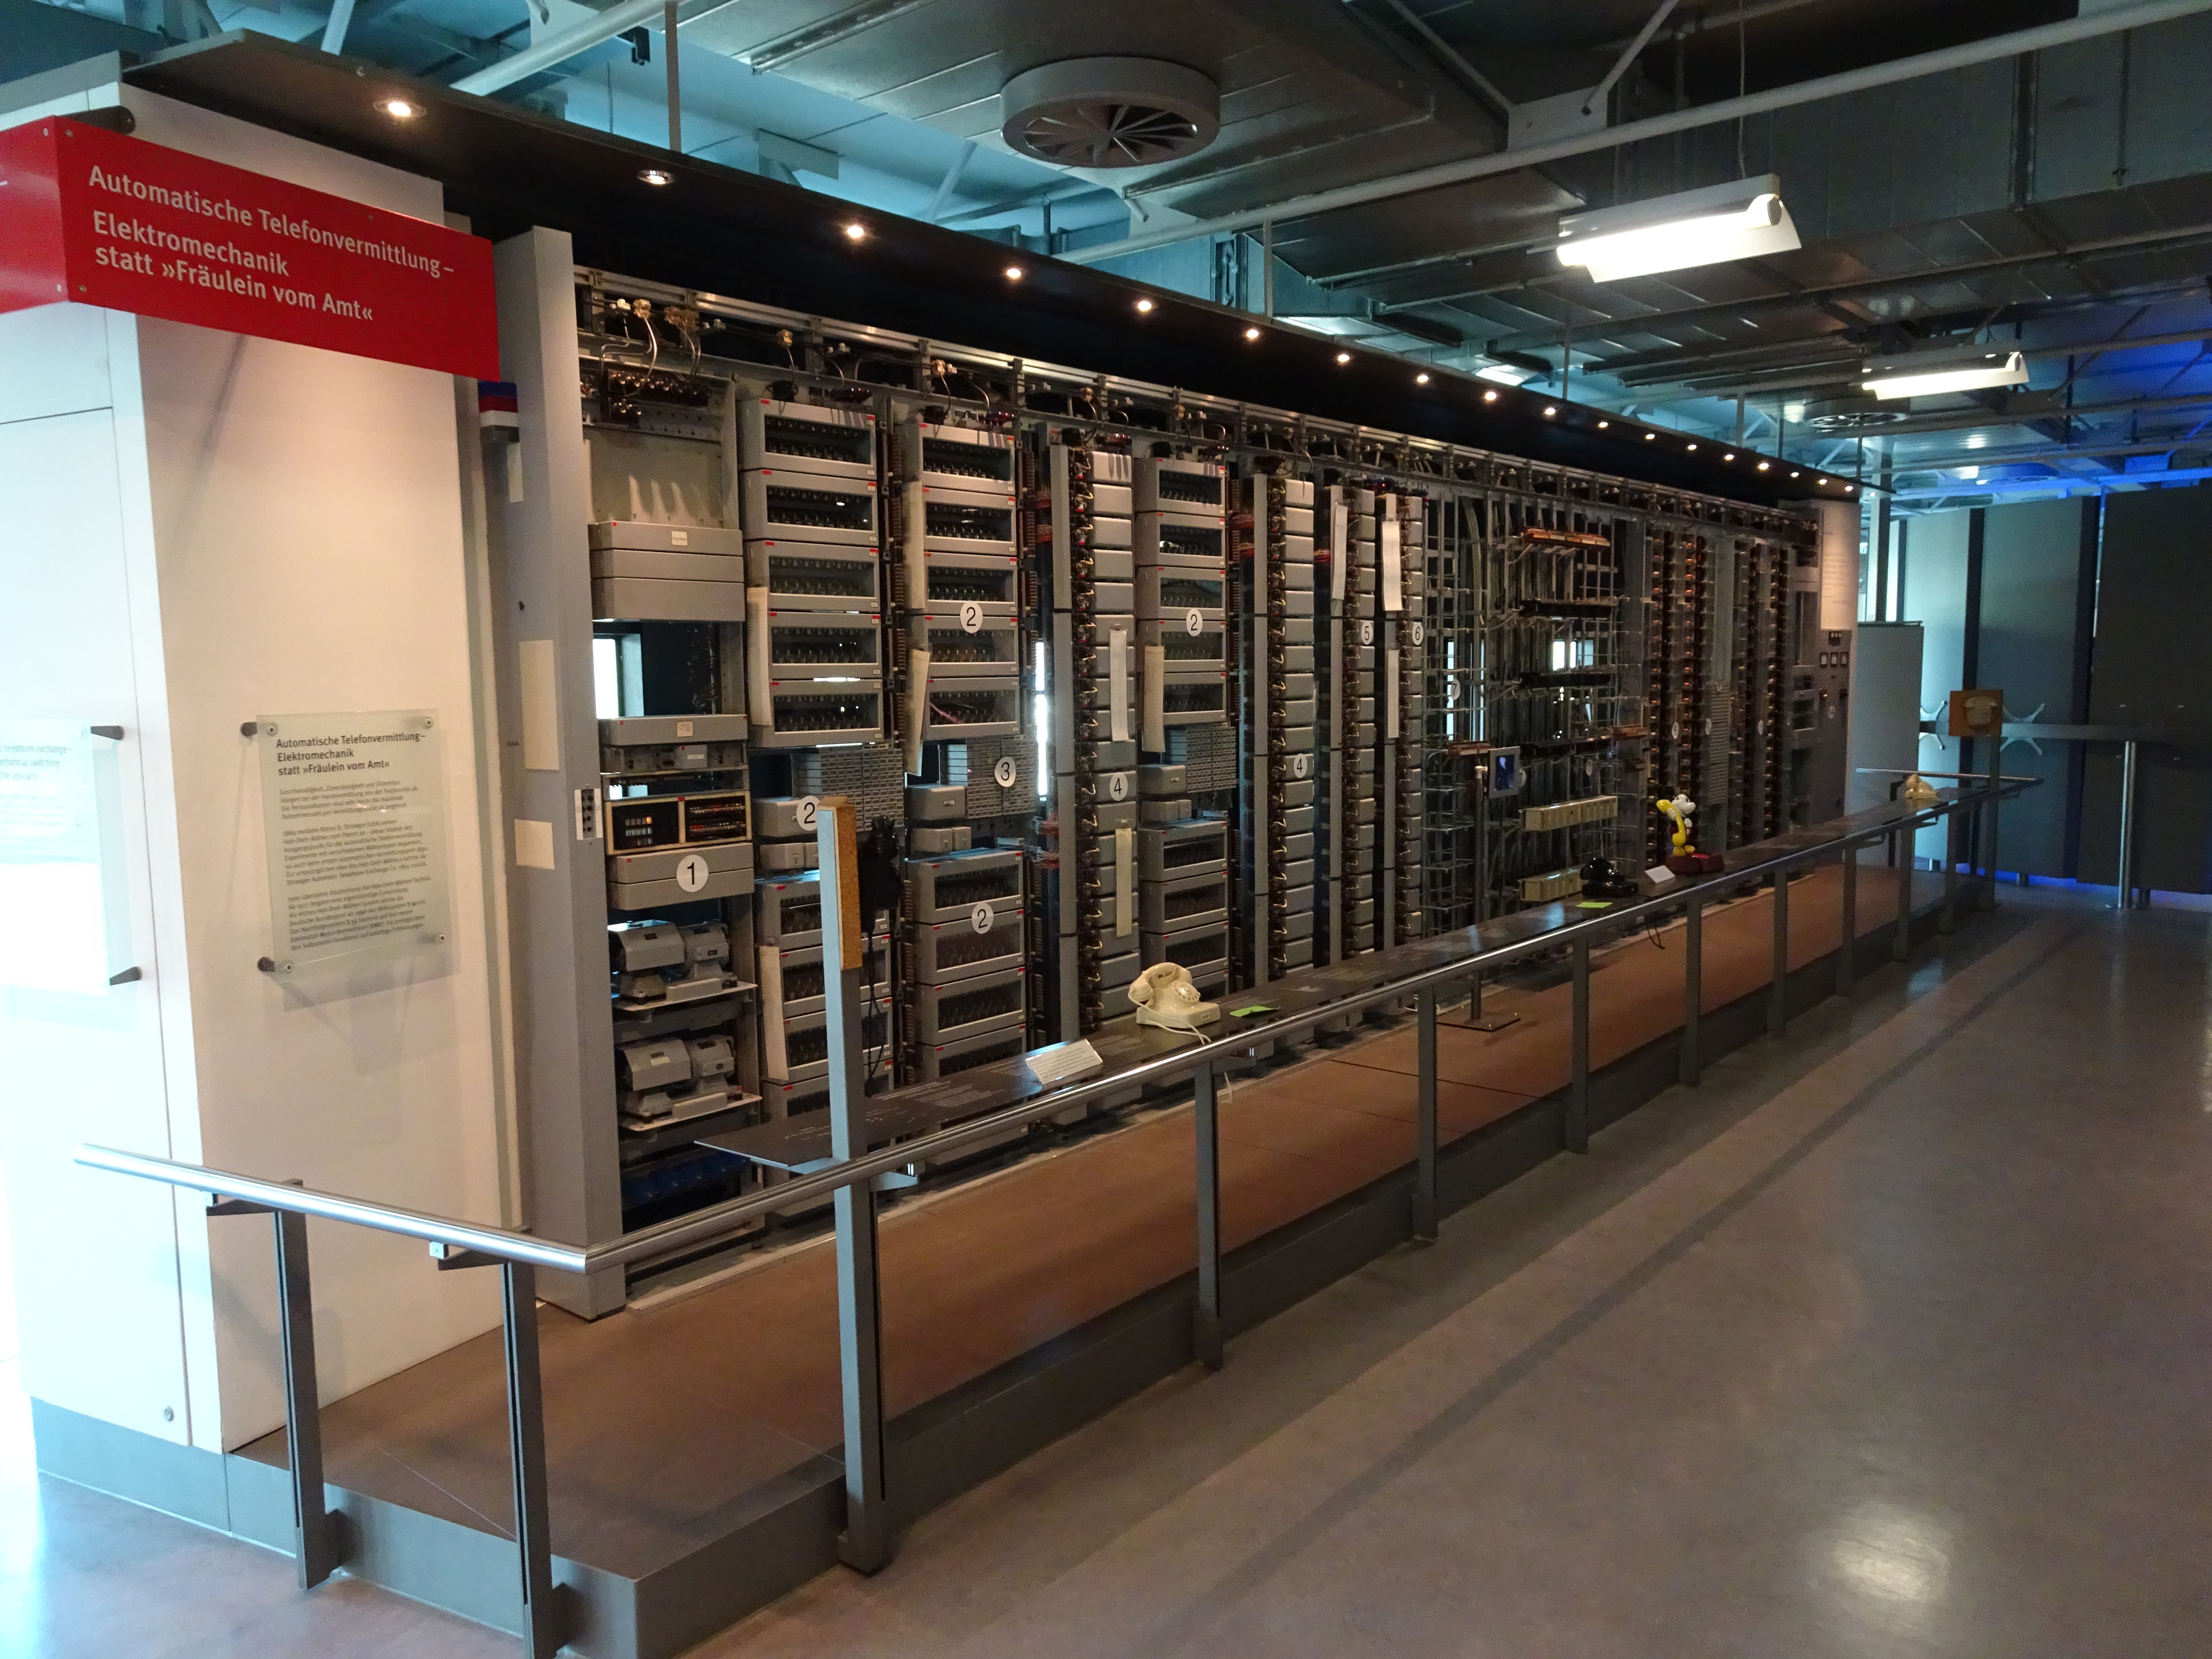 An electromechanical telephone exchange with a few rotary phones in front